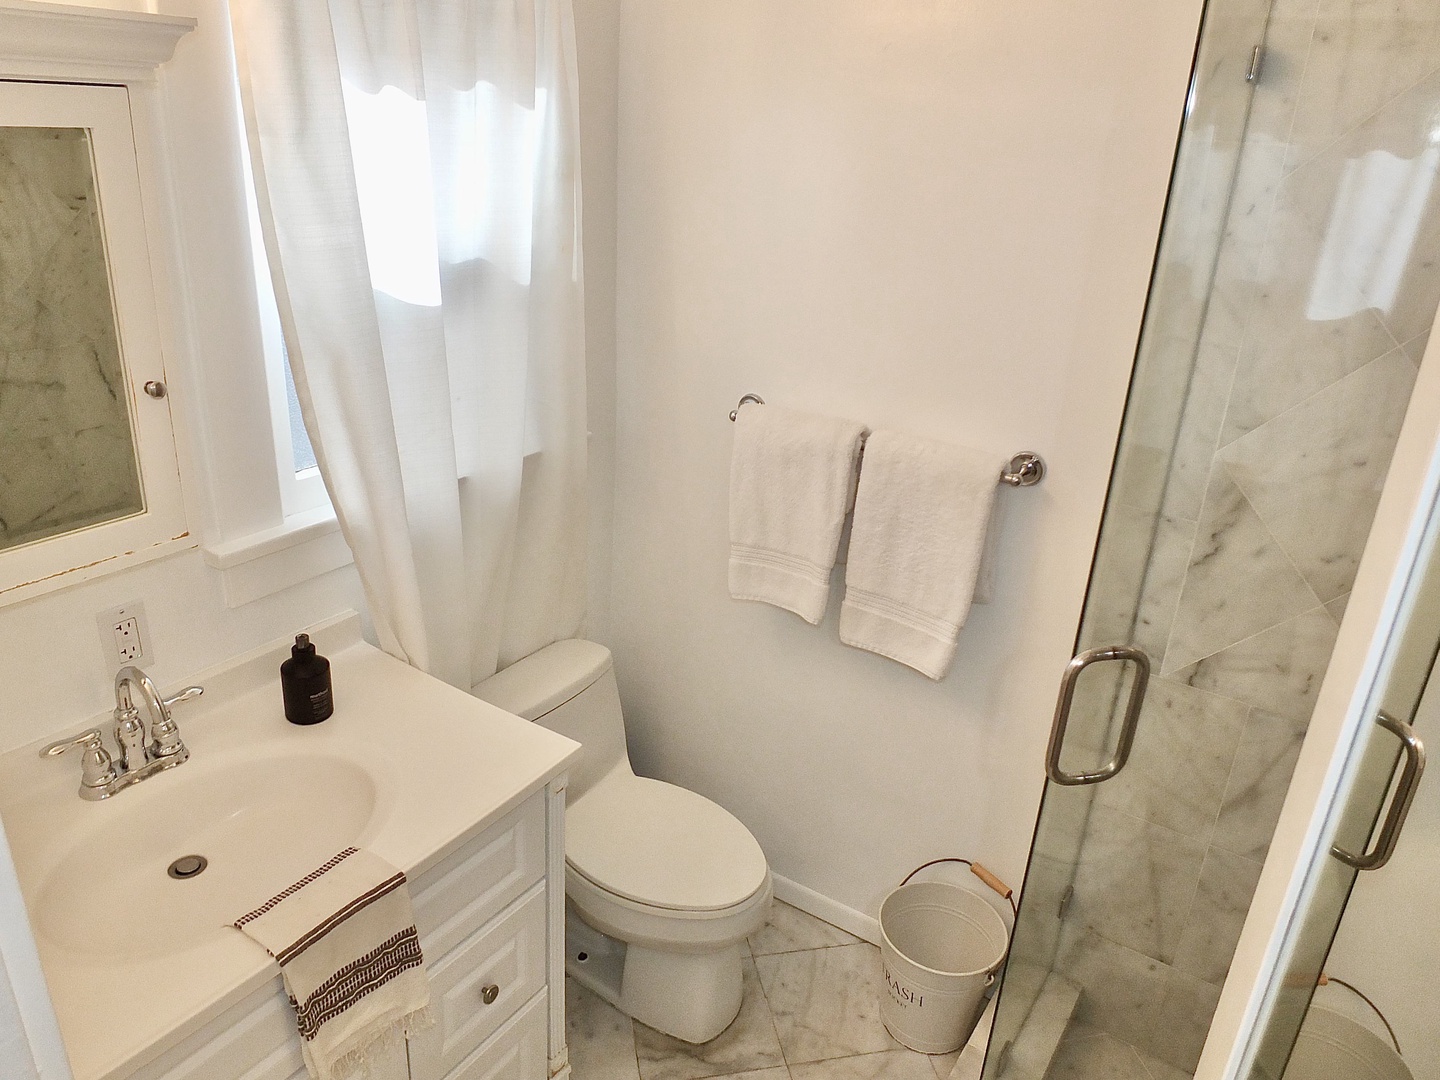 En-suite bathroom with stand up shower